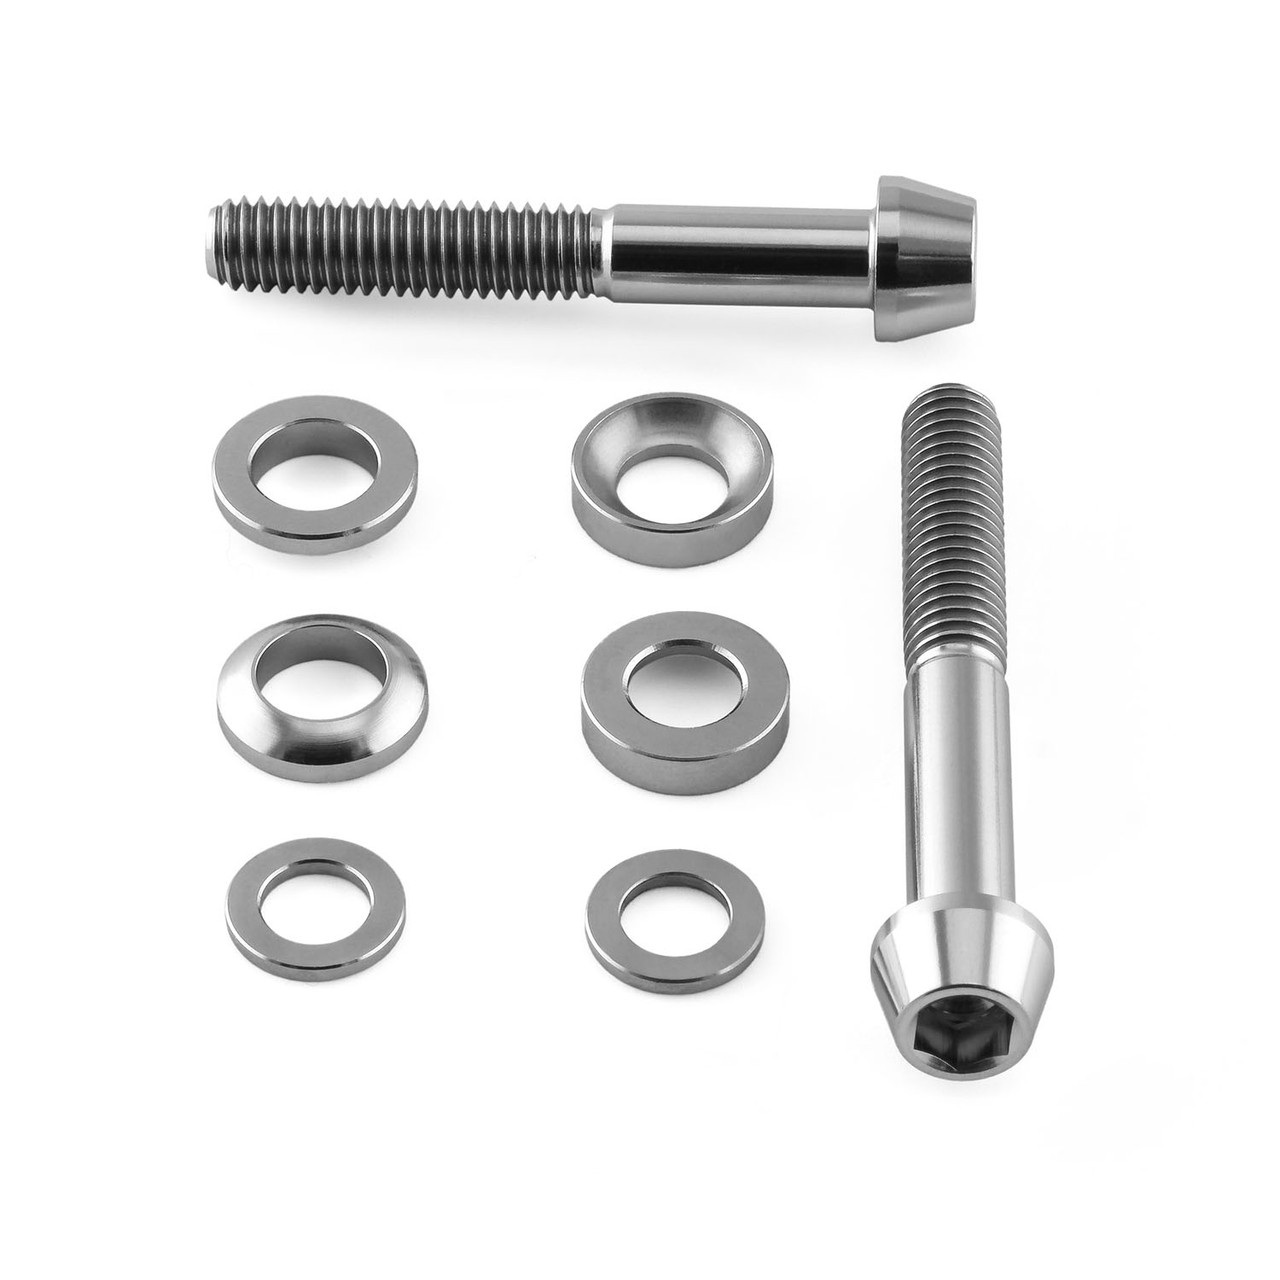 Kit con 2 Válvulas Tubeless X-ON 6061 Alloy T6 - 45 mm + Llave + Conector